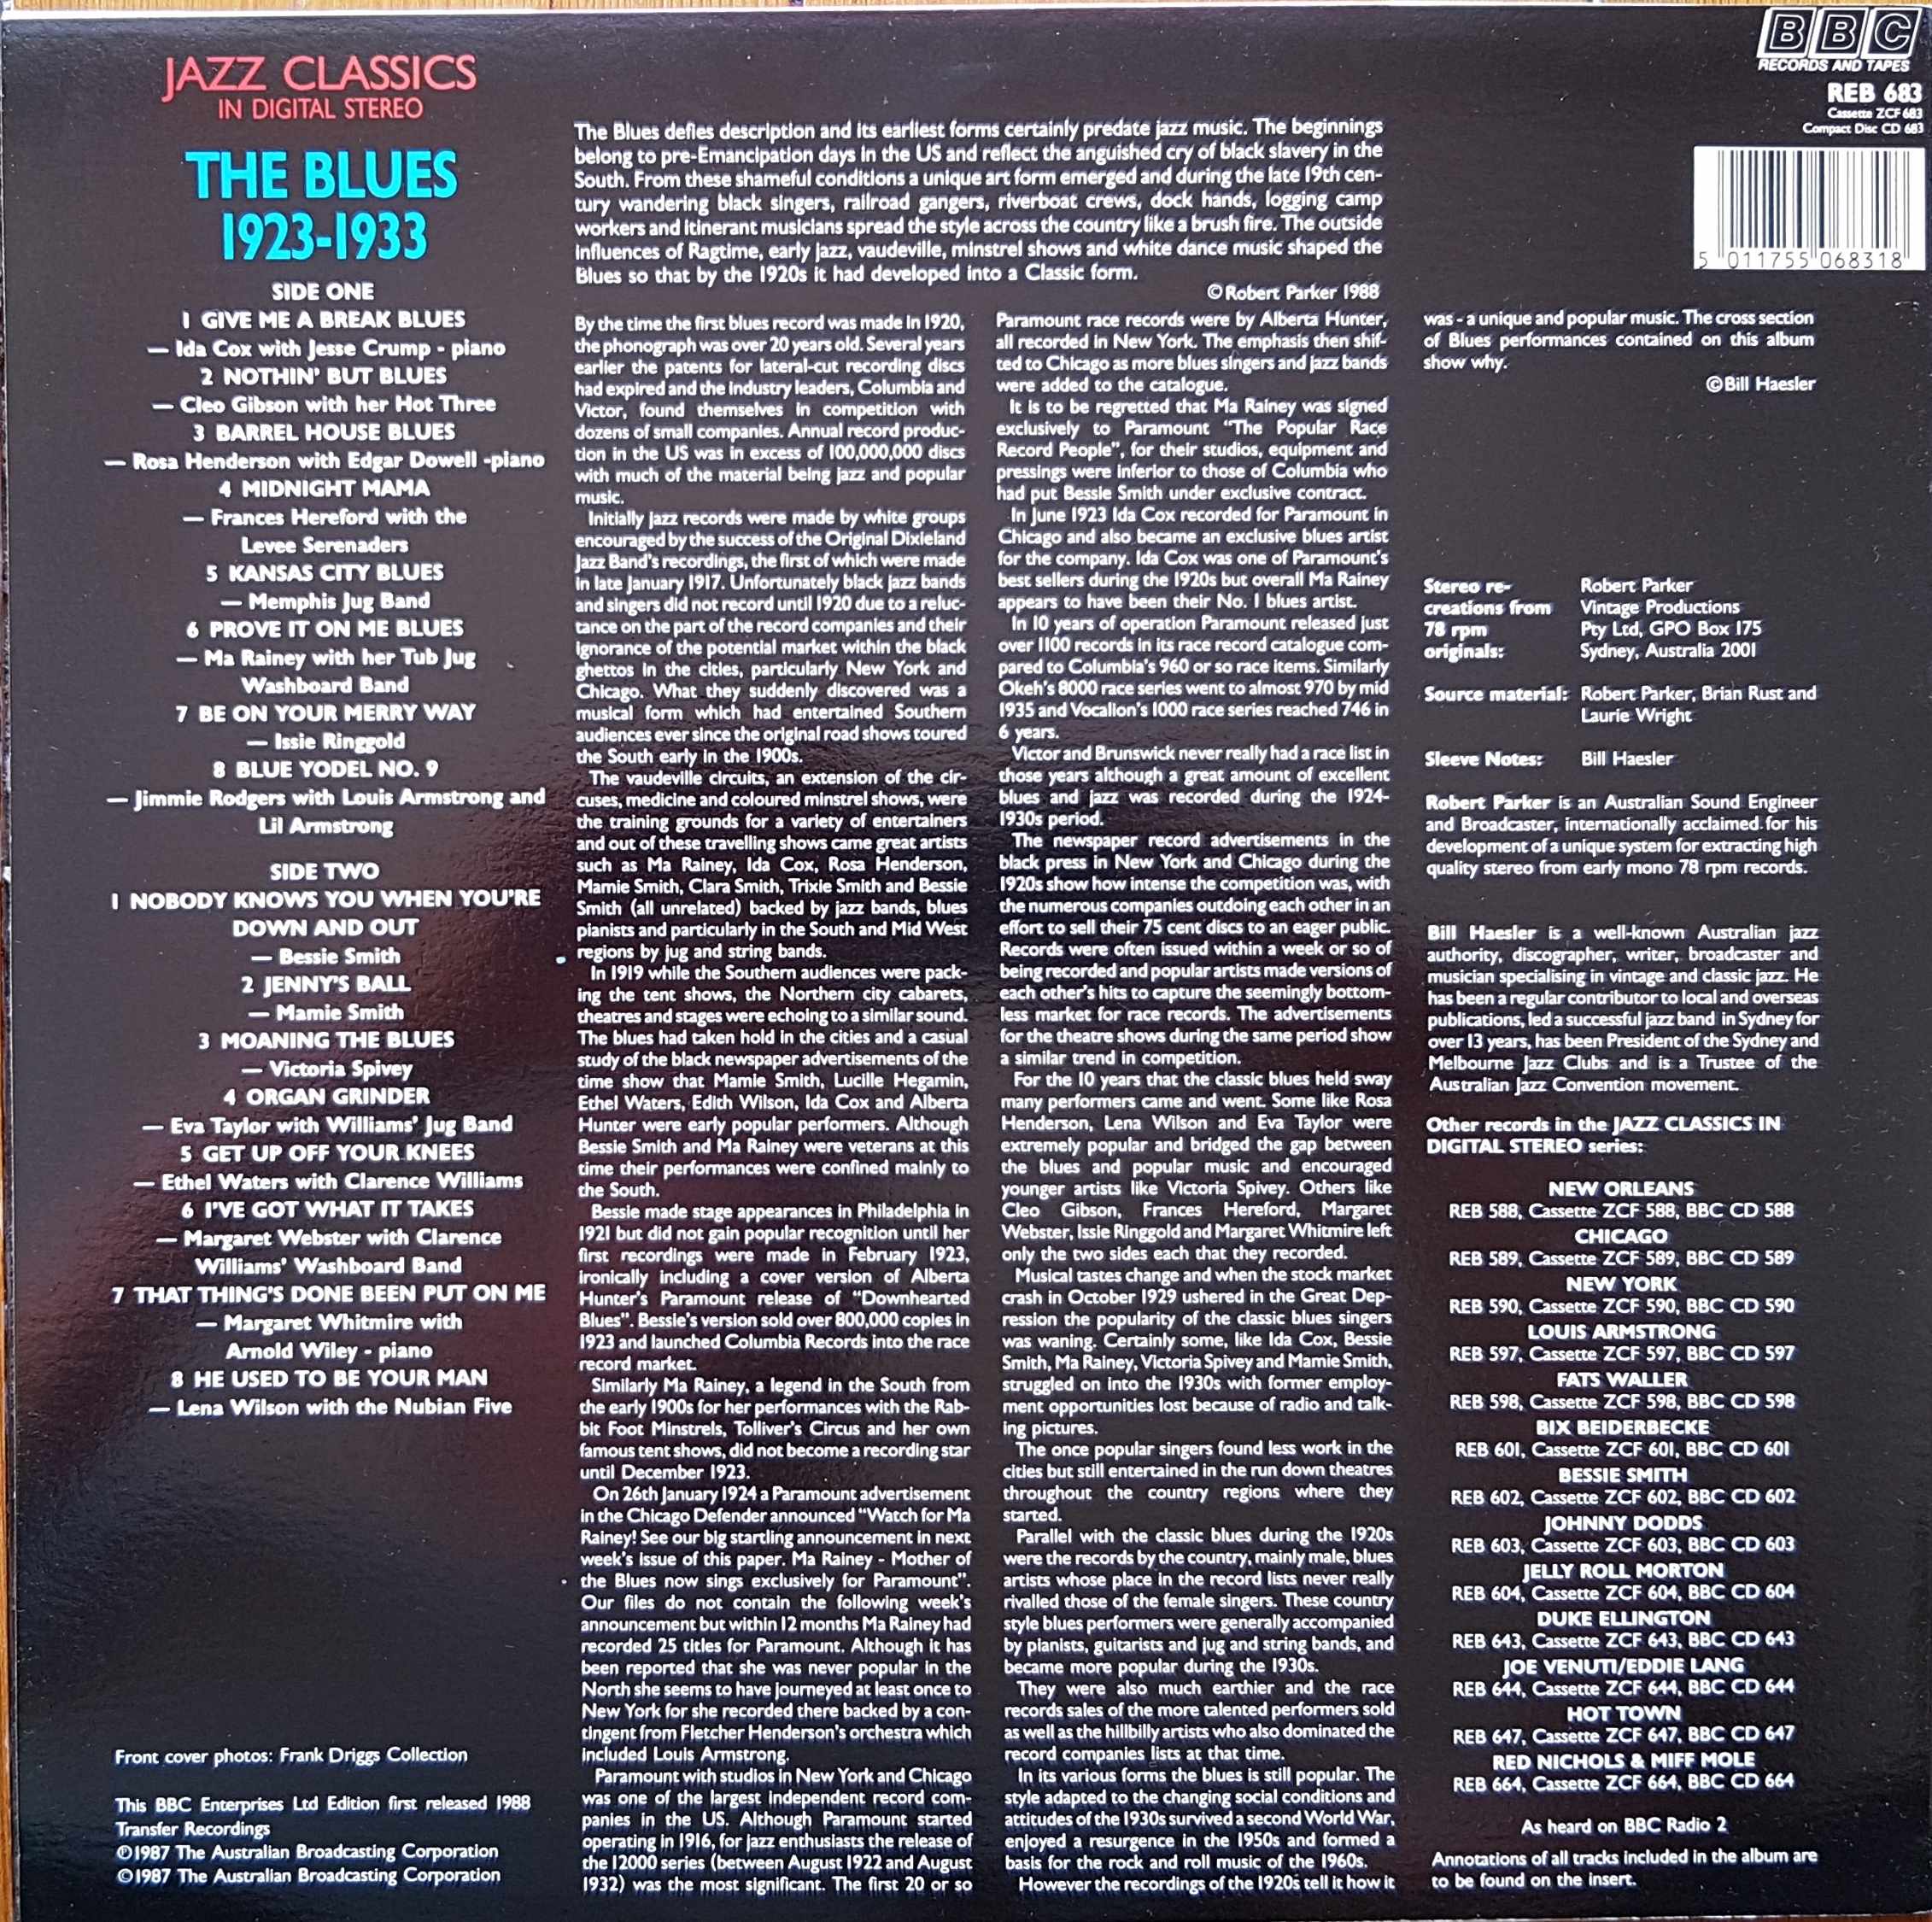 Back cover of REB 683